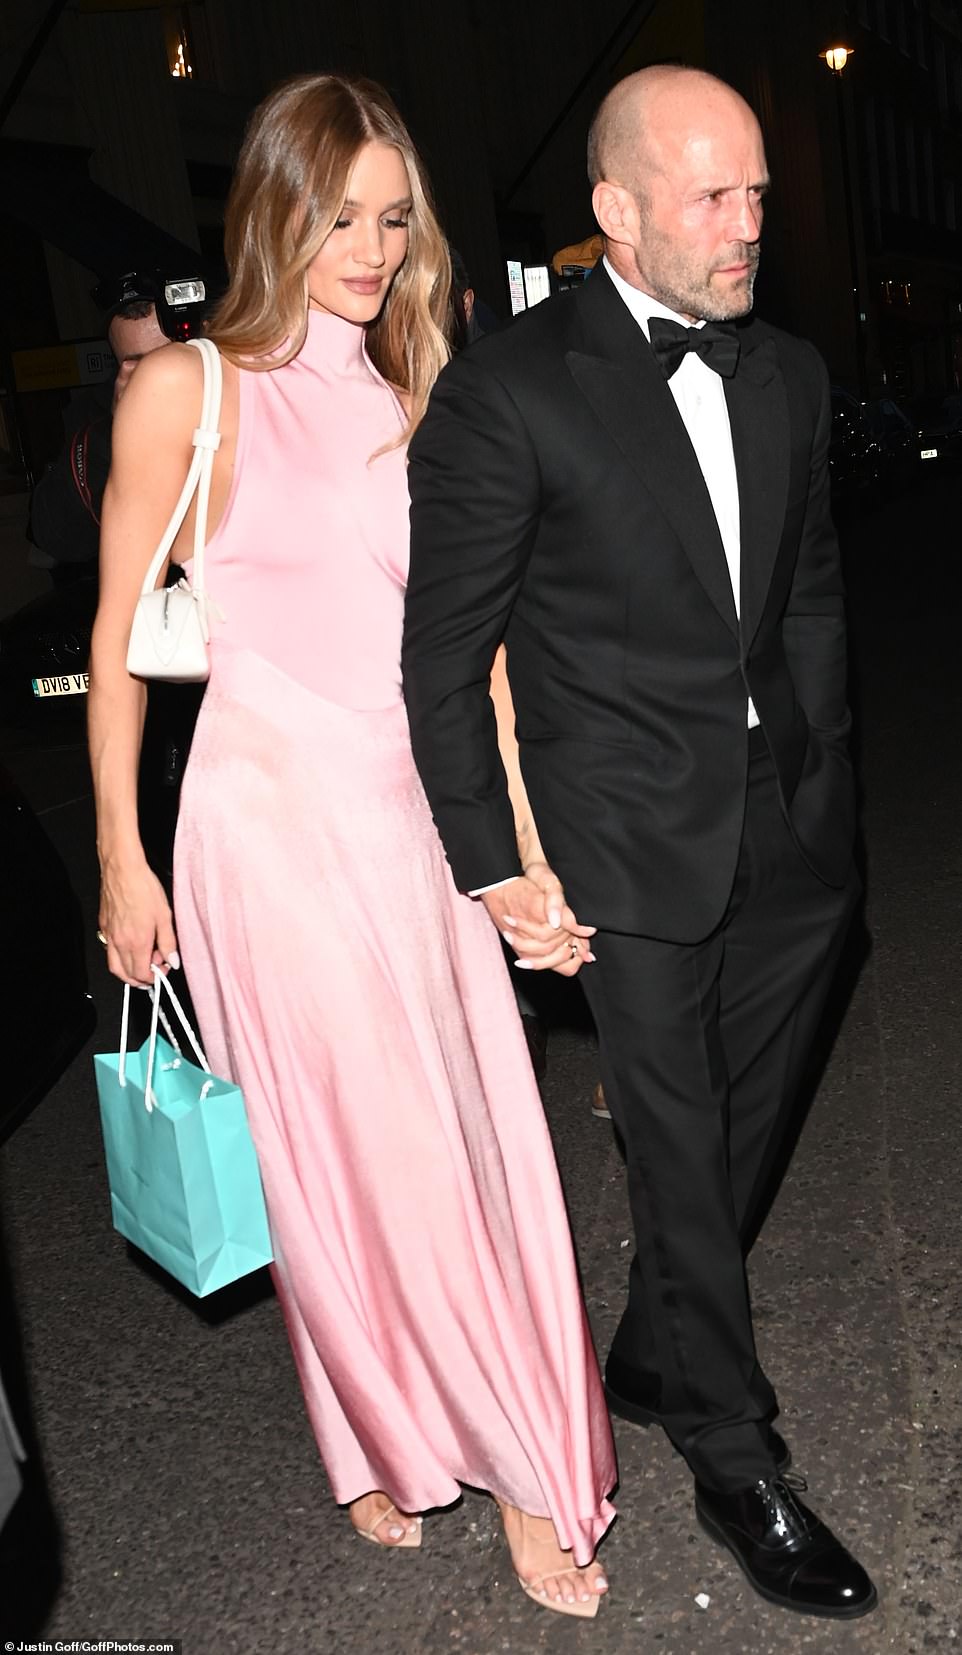 Rosie Huntington-Whiteley cut a glamorous figure in a silky pink gown as she arrived with dashing partner Jason Statham